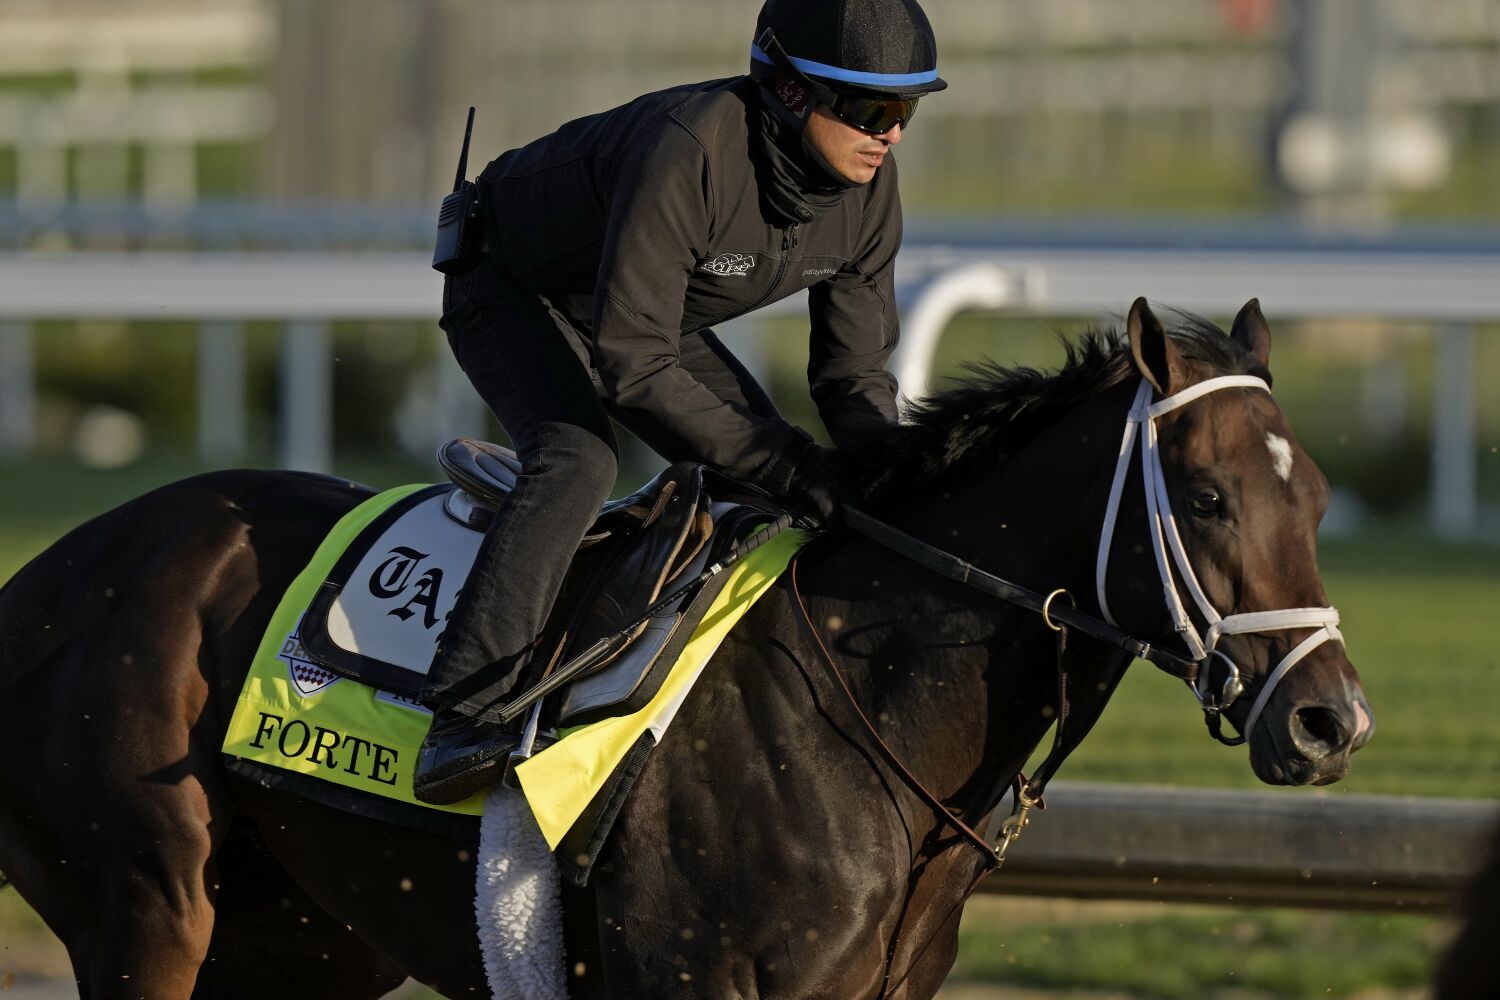 Forte is early favorite in very competitive Belmont Stakes